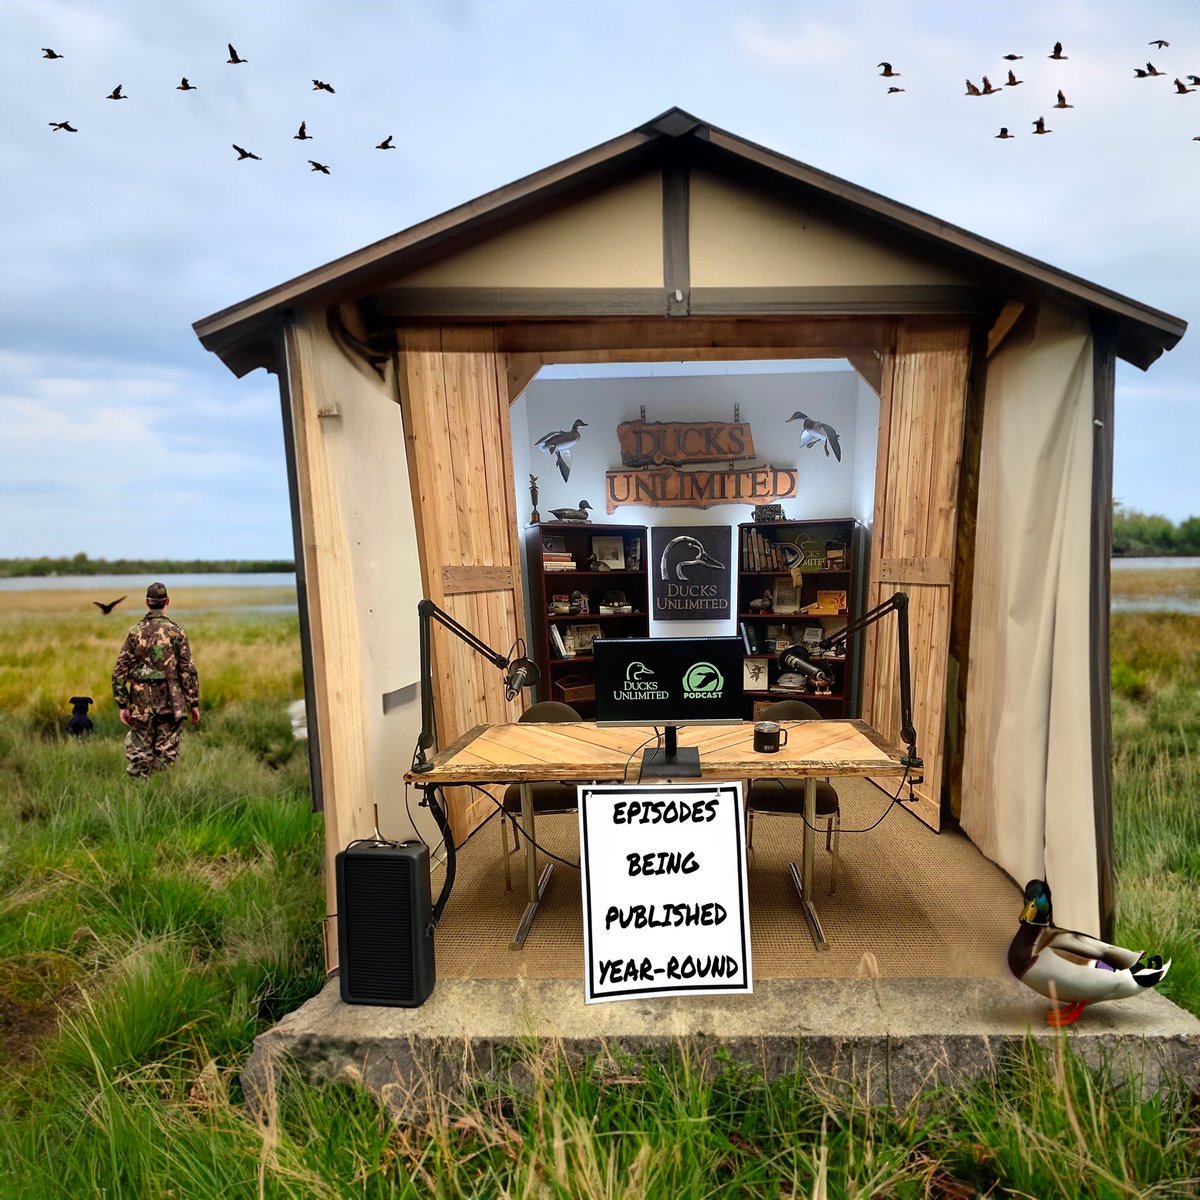 AI-powered image generators are powerful tools... But we aren’t sure how we feel about this podcast promo image. 

Anywho, the #DUPodcast is now in its Year-Round Era. Tune in to the only podcast about all things waterfowl & wetlands conservation twice a week, every week. Listen…